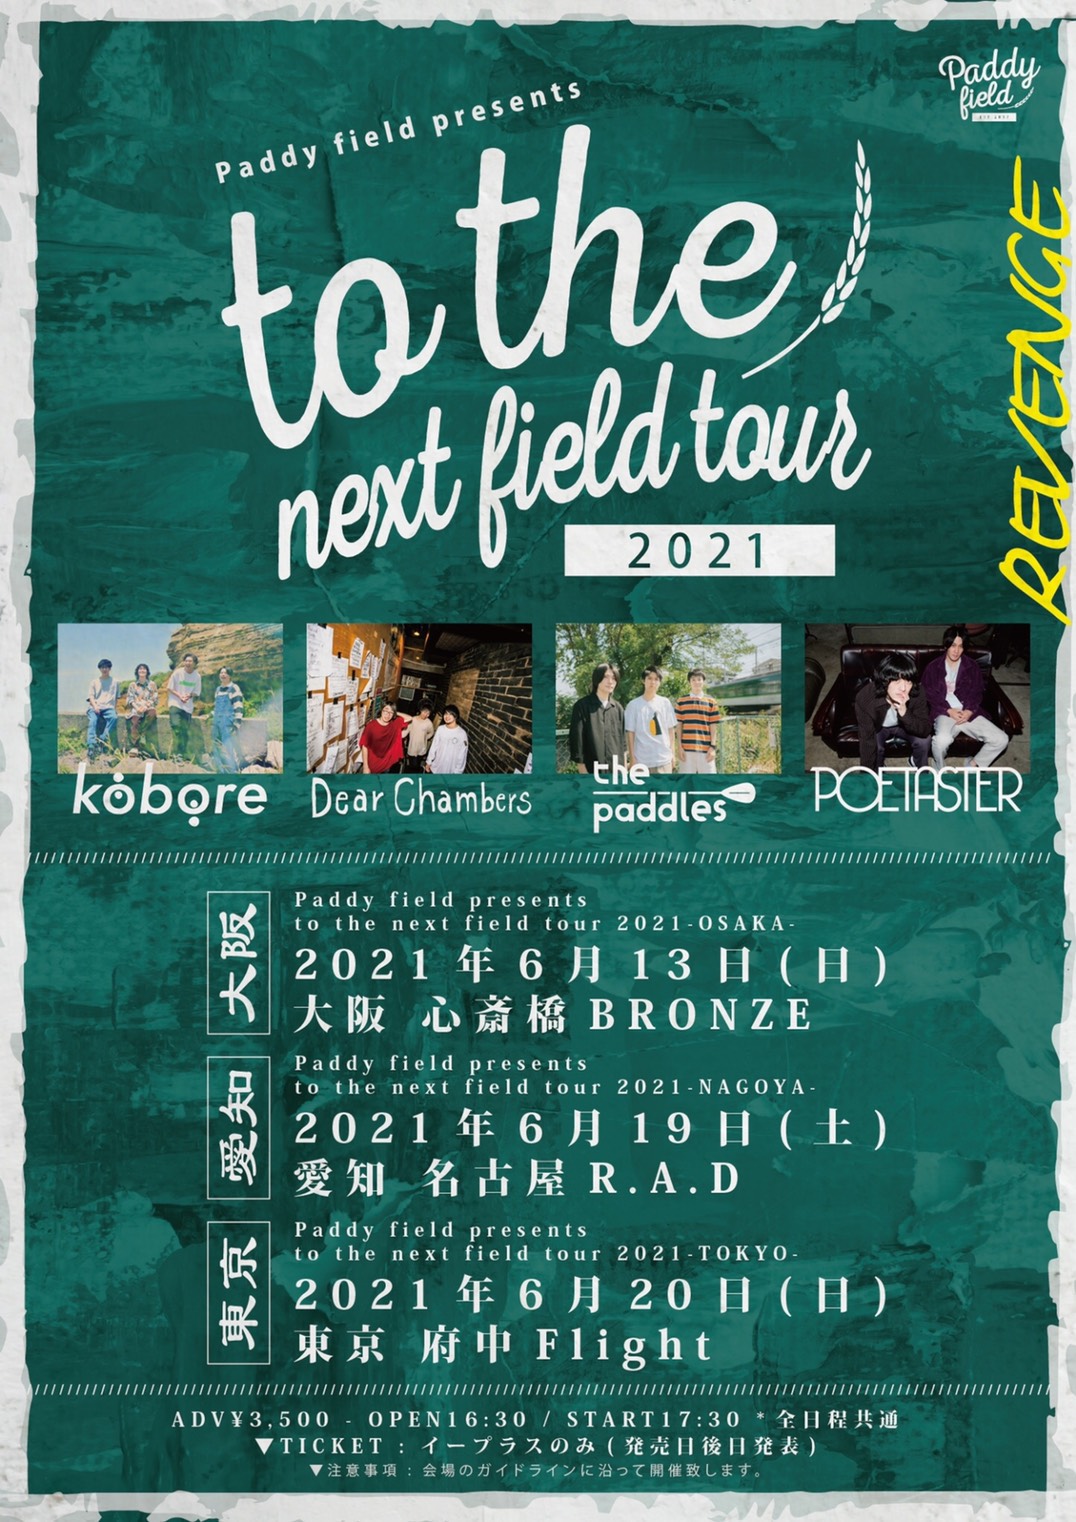 Paddy field presents "to the next field tour 2021"